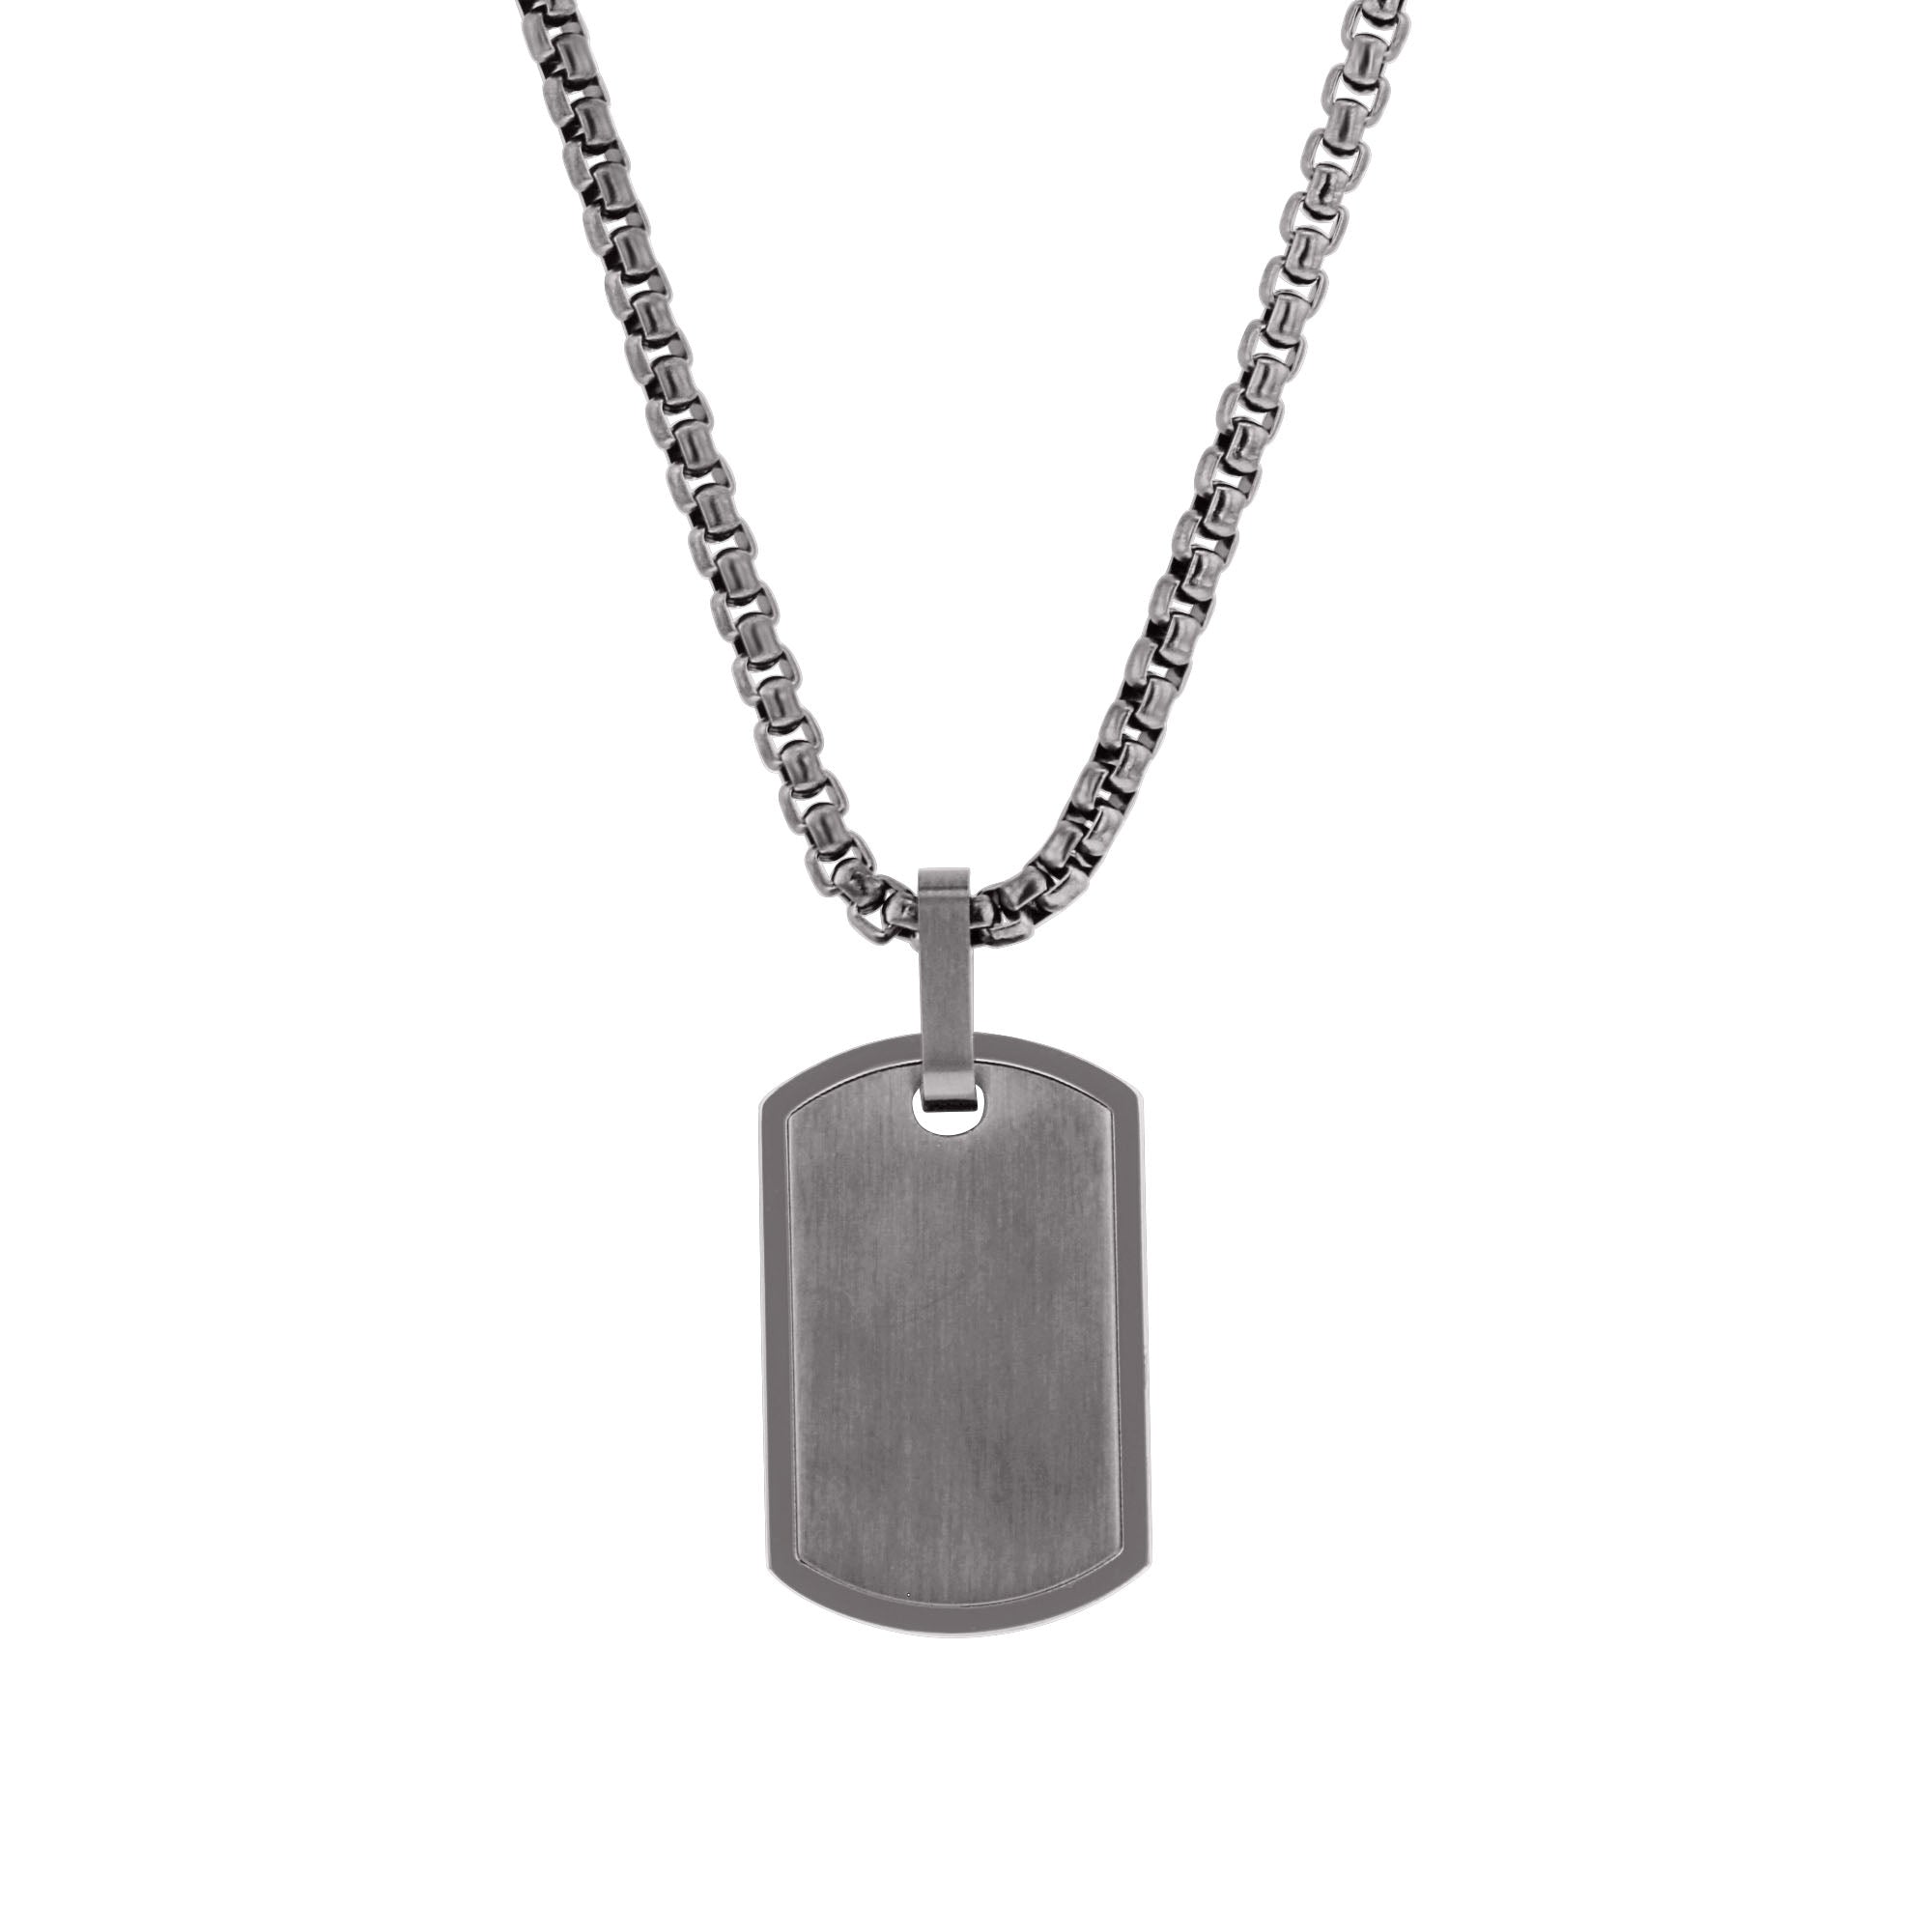 Honor Stainless Steel Dog Tag Necklace